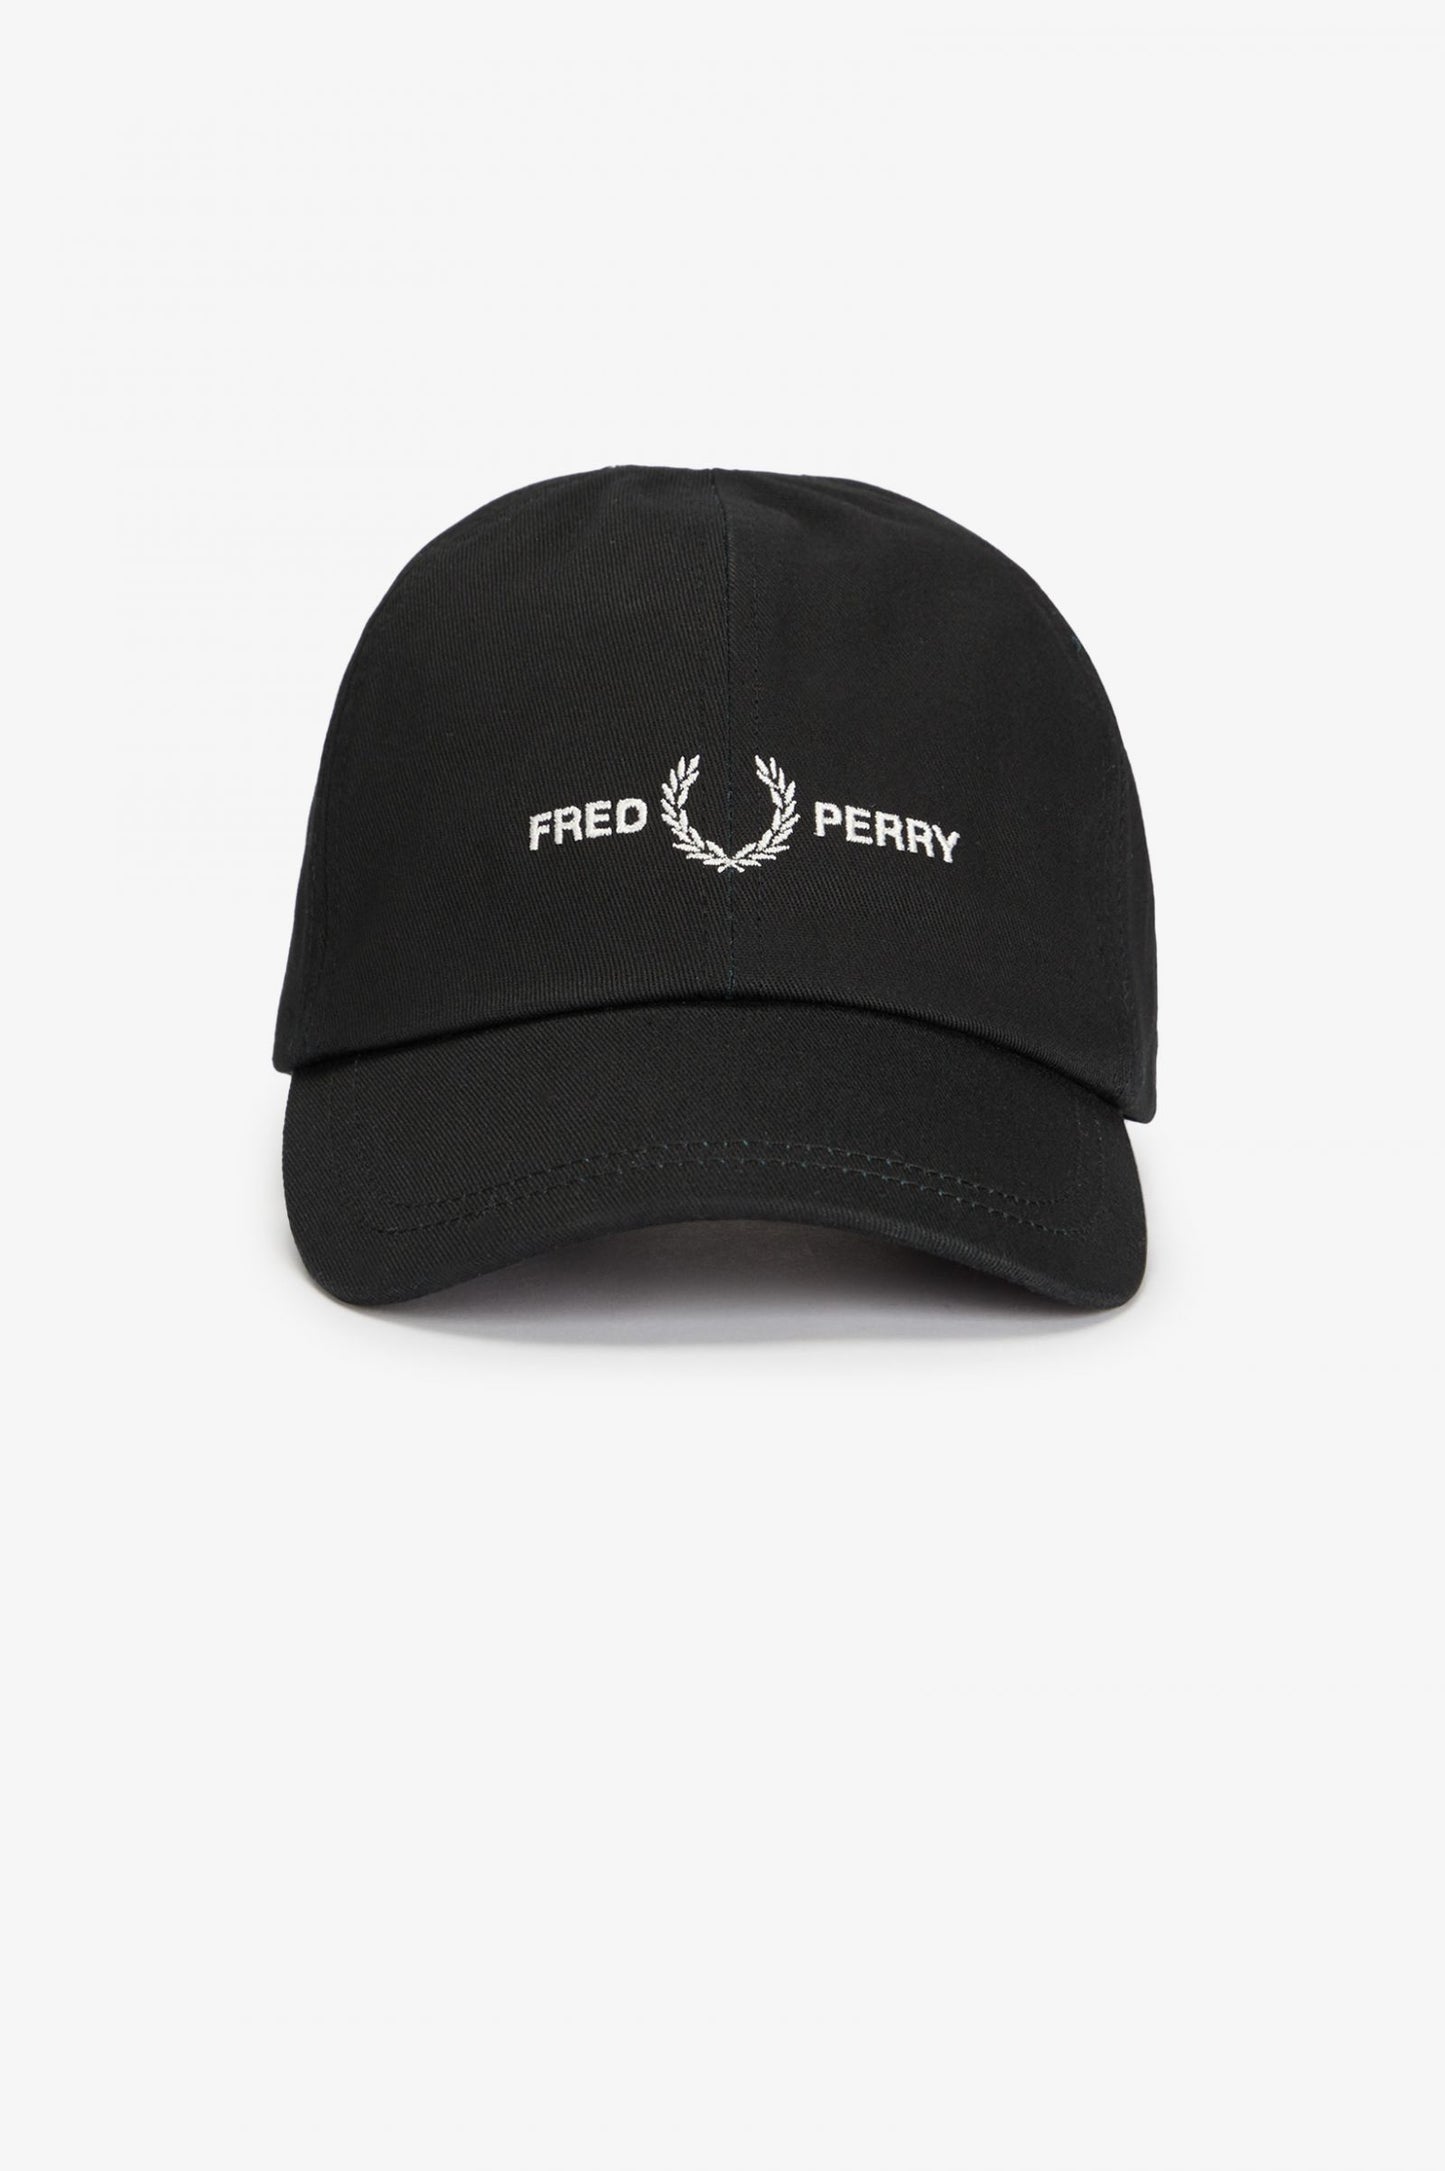 Fred Perry Graphic Branding Twill Cap Black